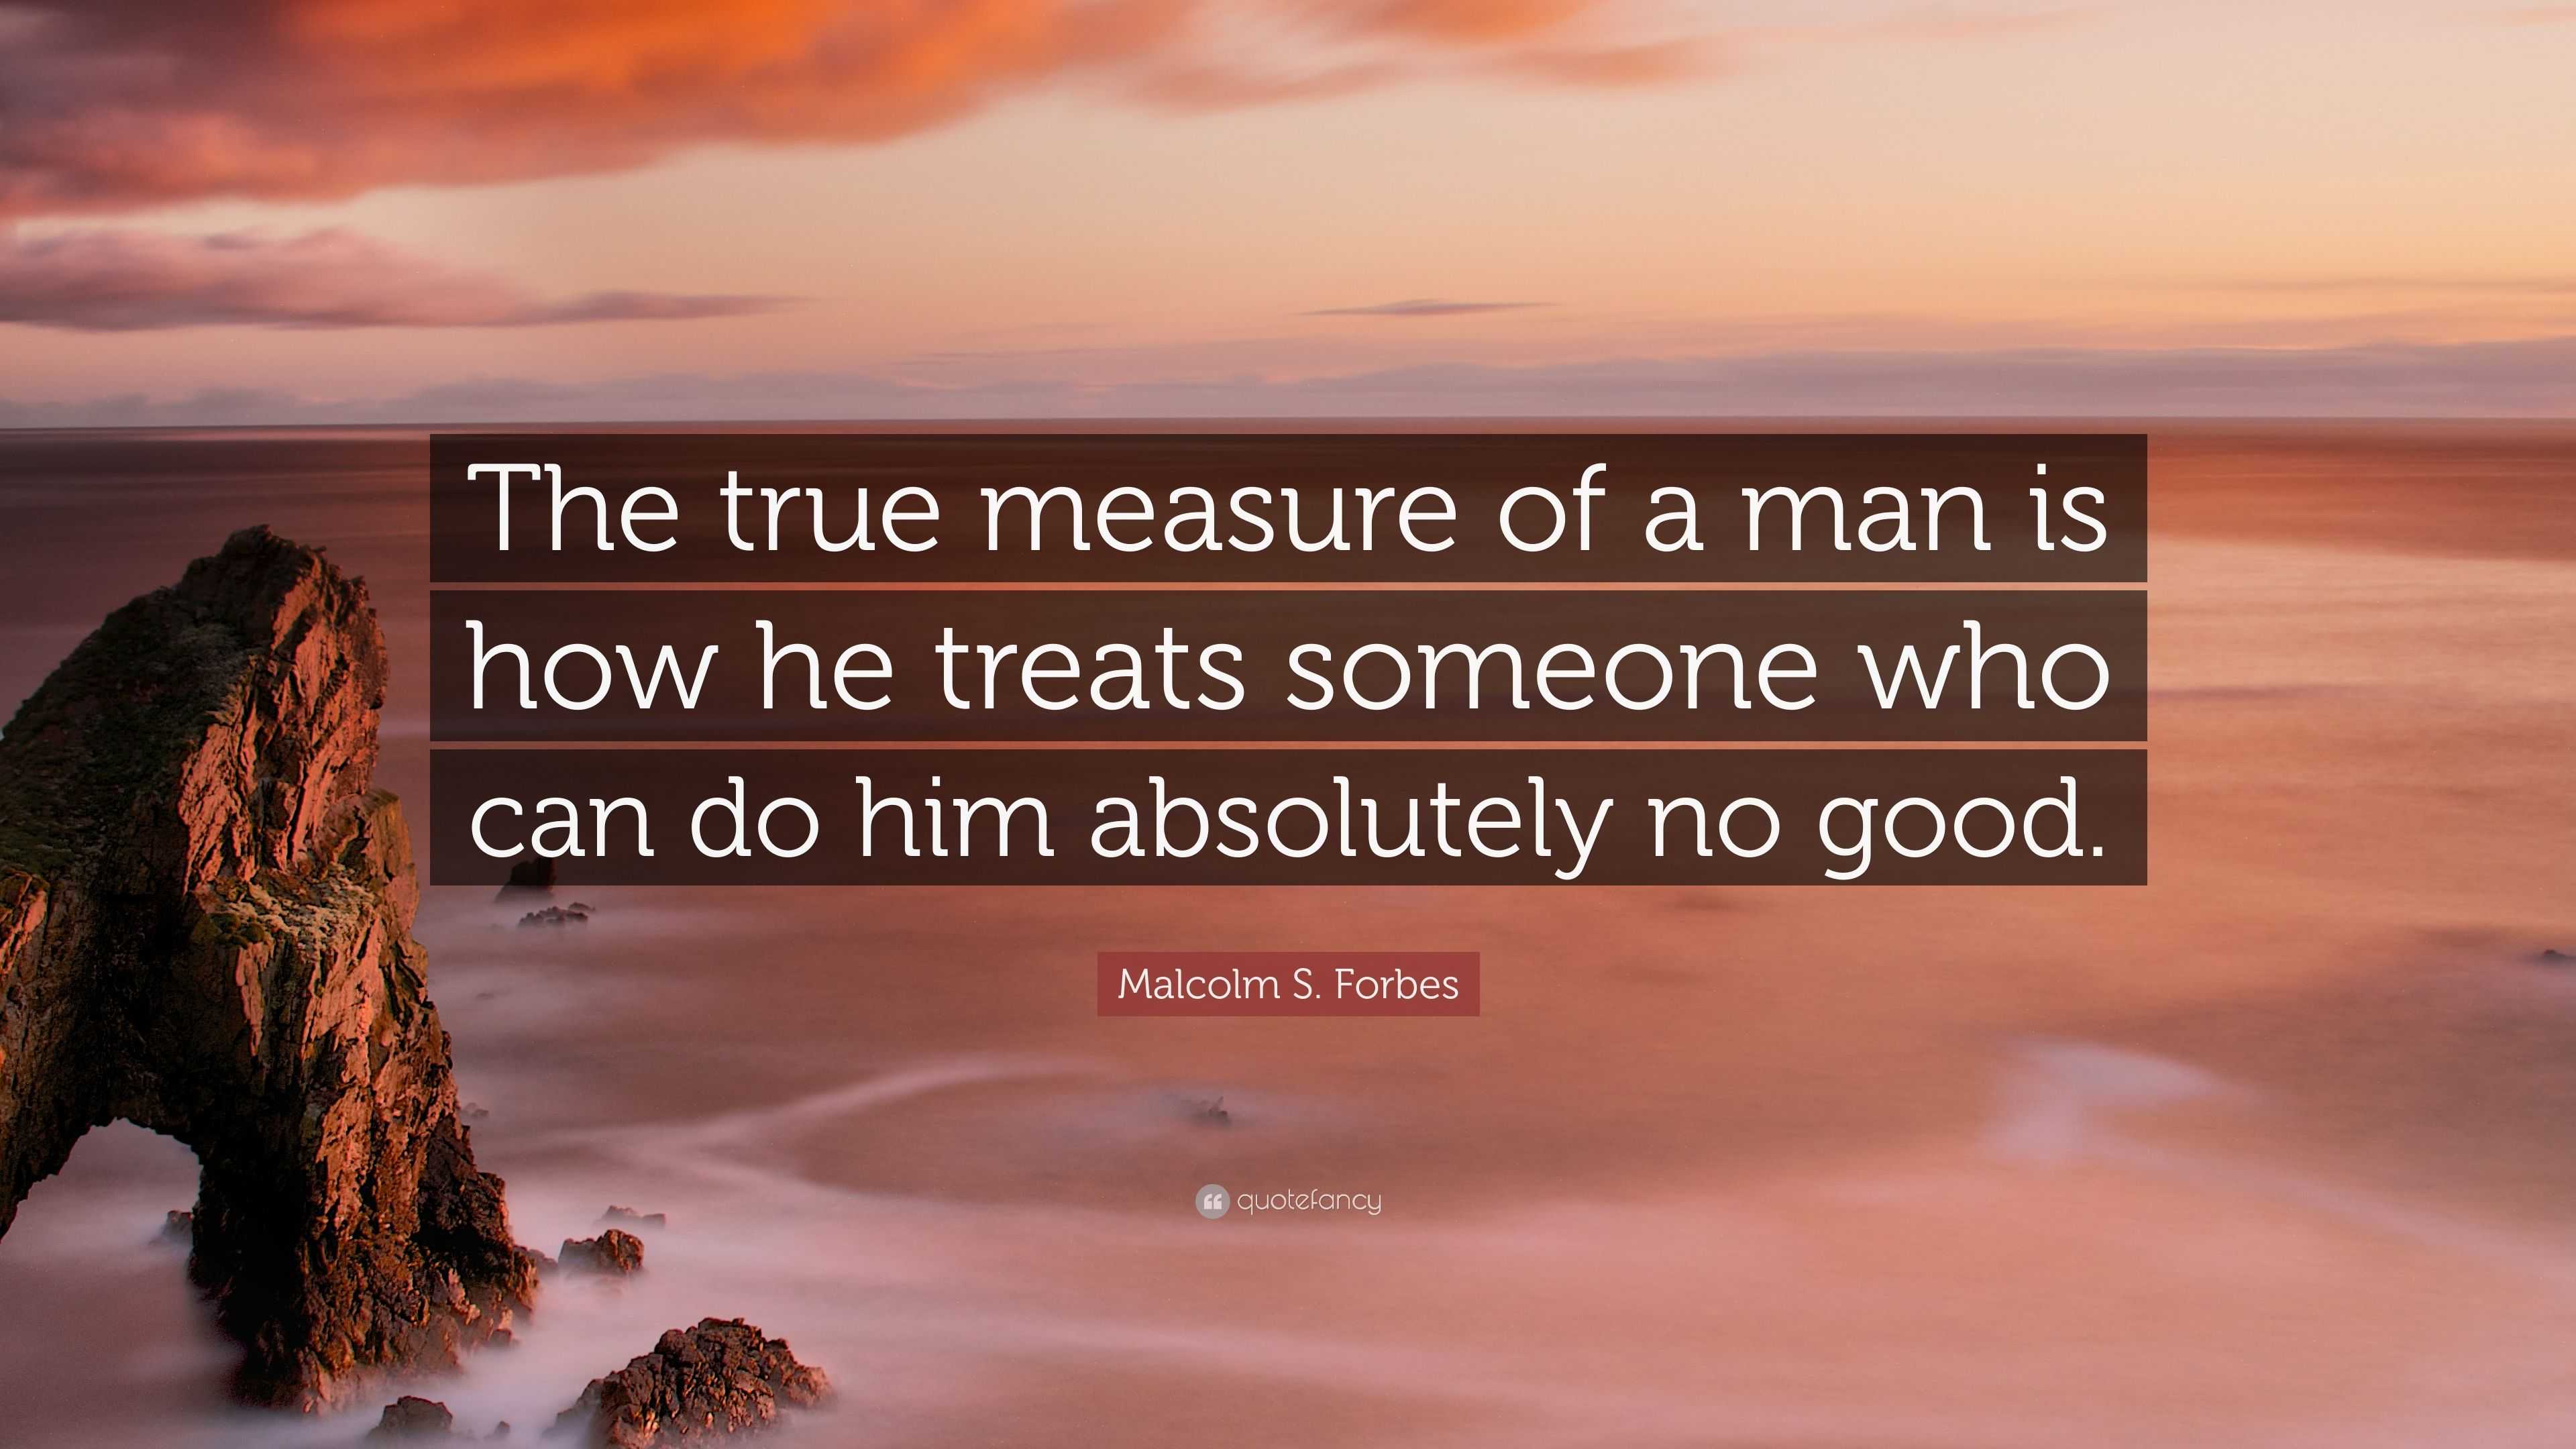 Malcolm S. Forbes Quote: “The true measure of a man is how he treats